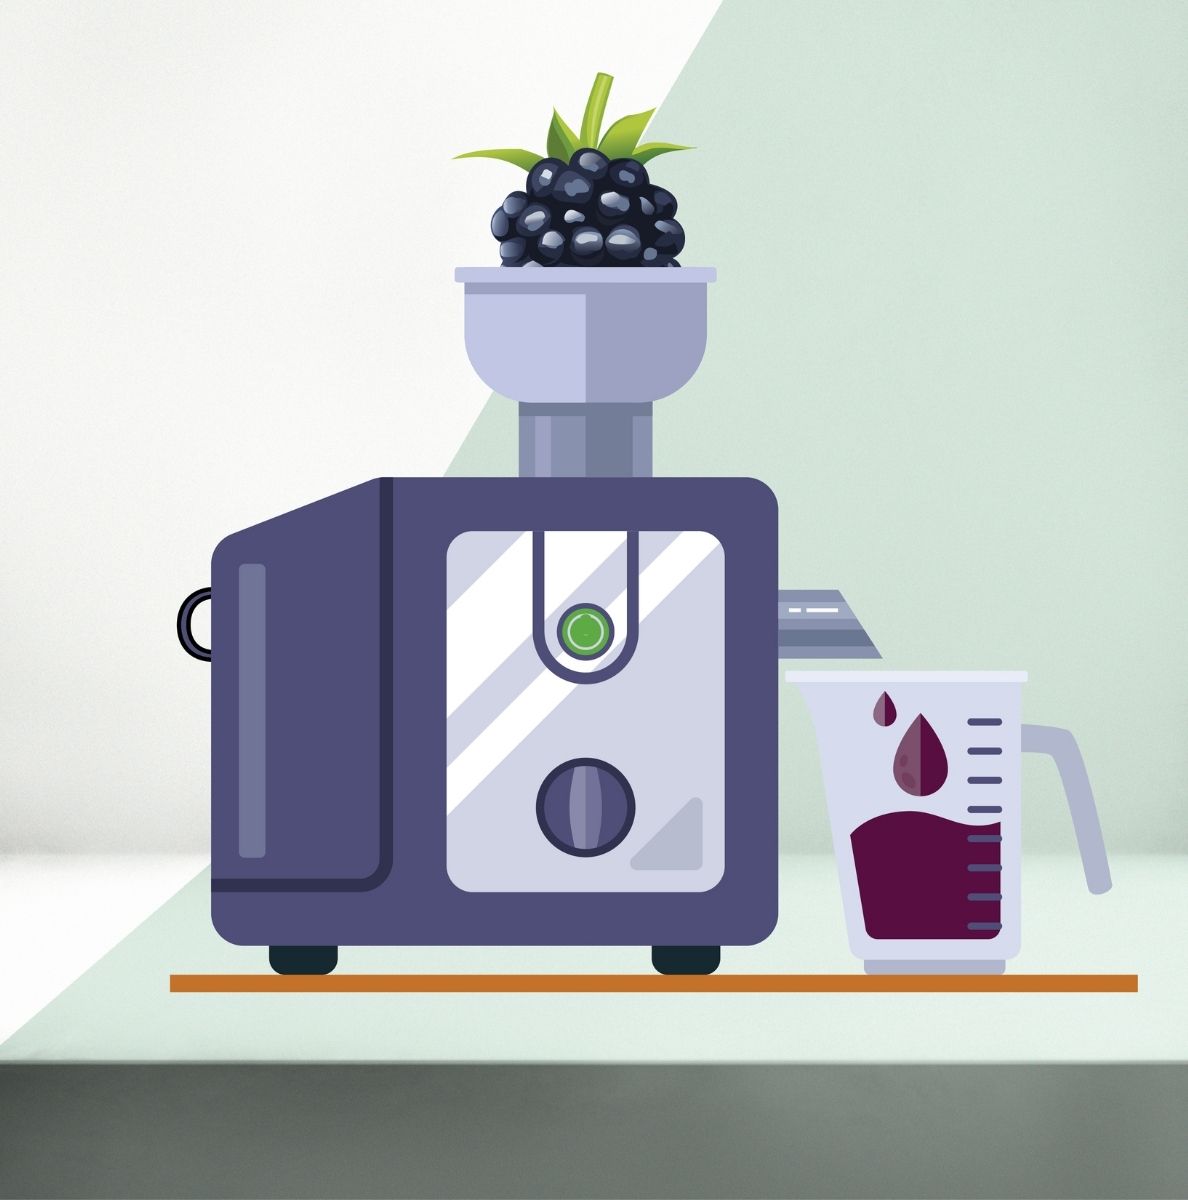 WHAT IS A COLD PRESS JUICER